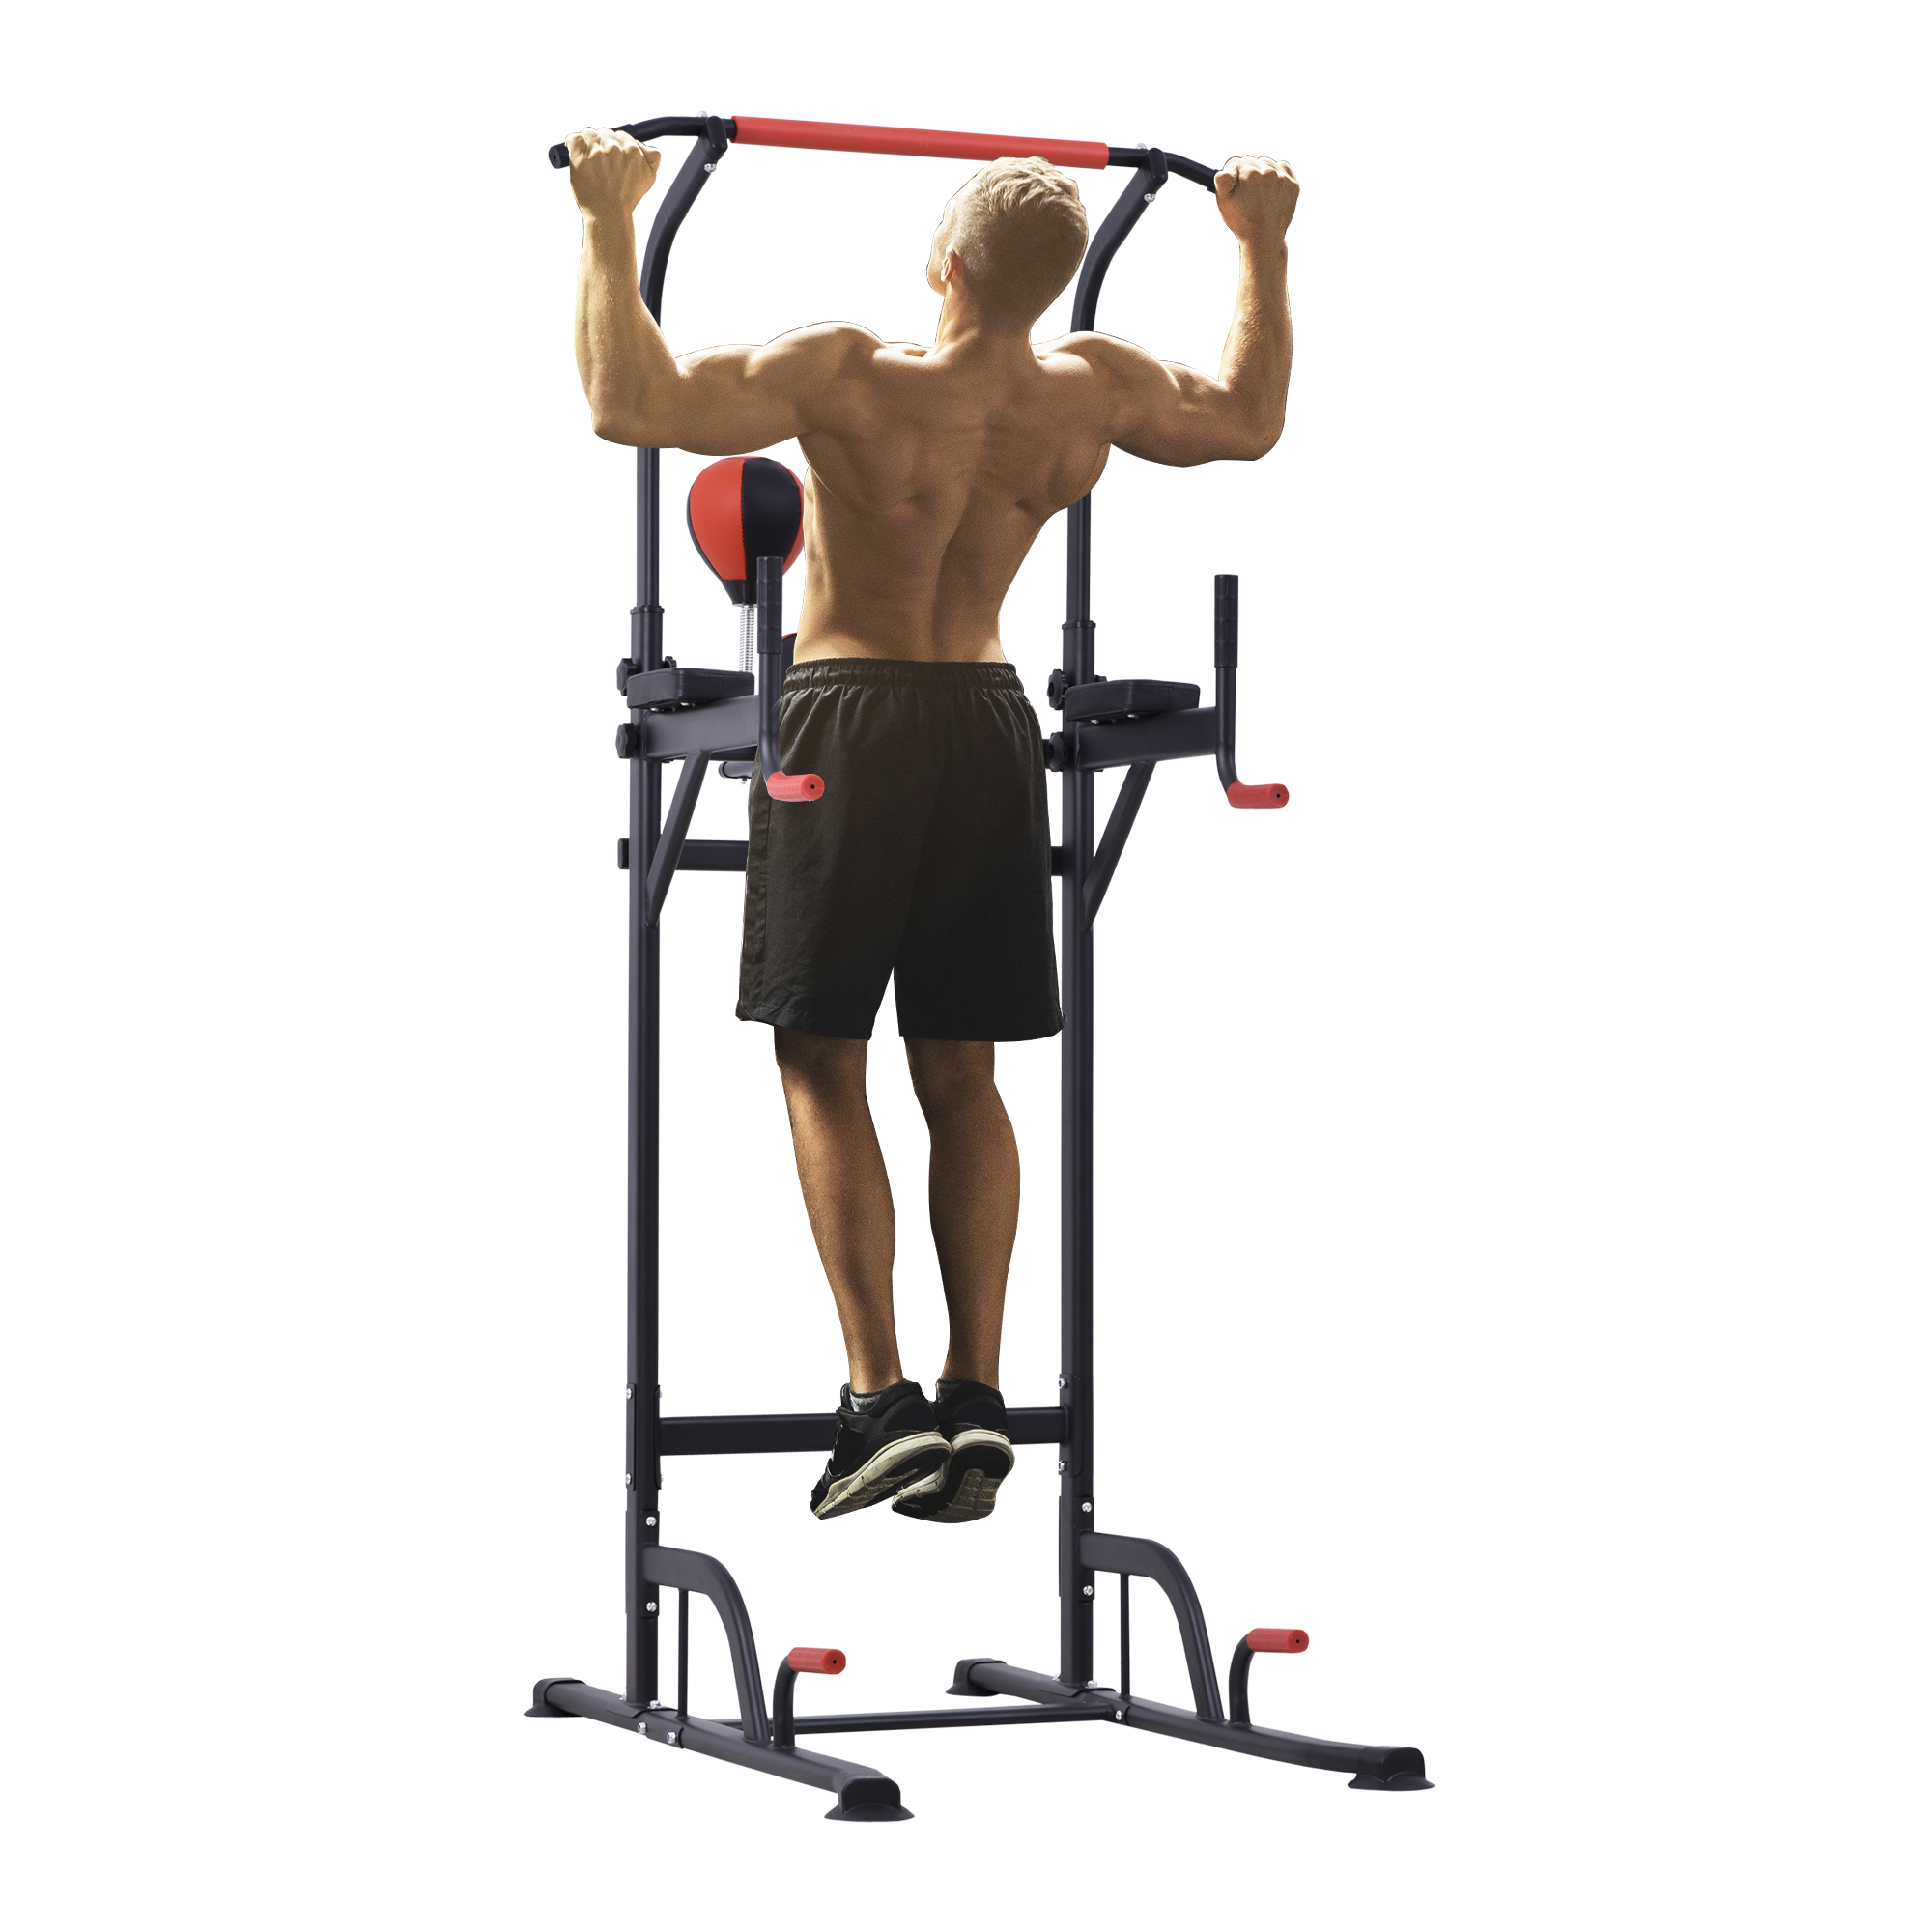 Musculation : Tout savoir sur les tractions - Pull Up Fitness